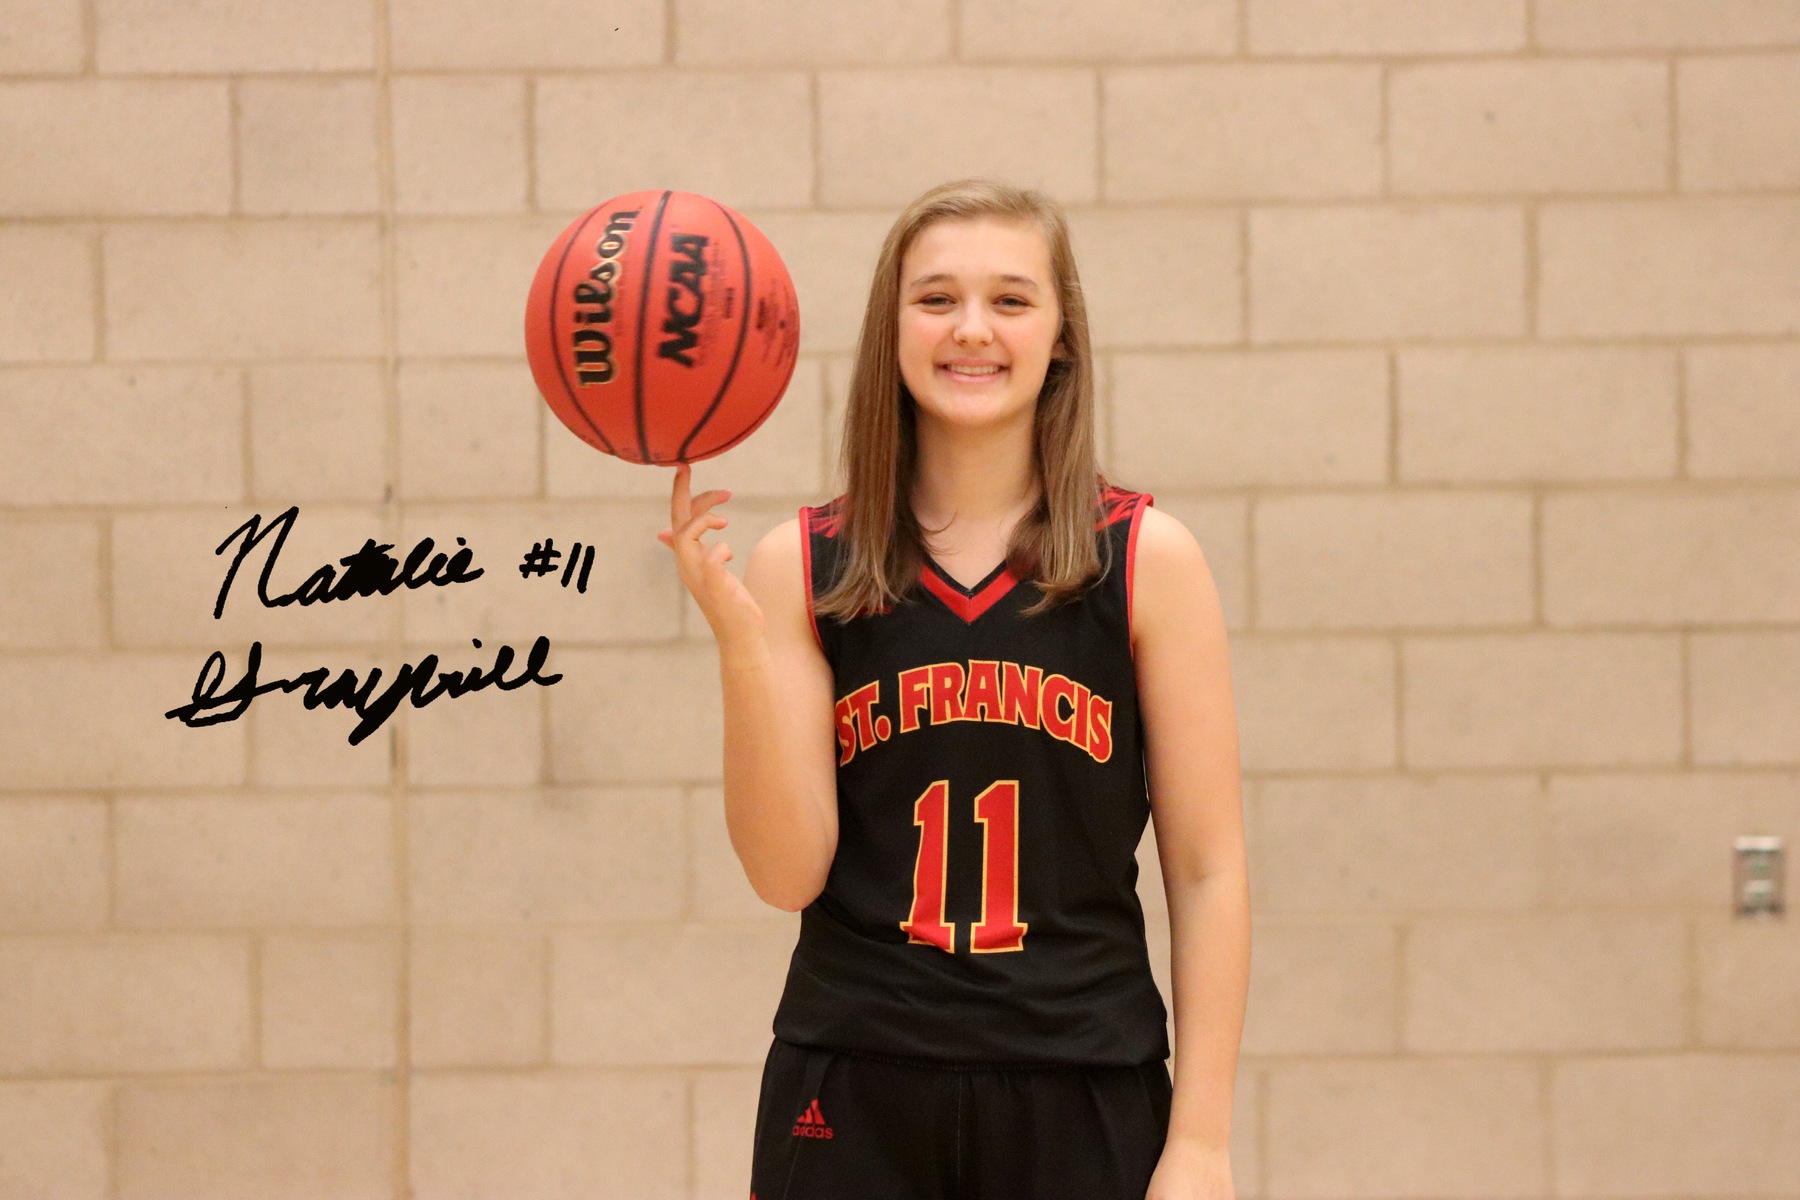 Get to Know: Basketball's #11 Natalie Graybill